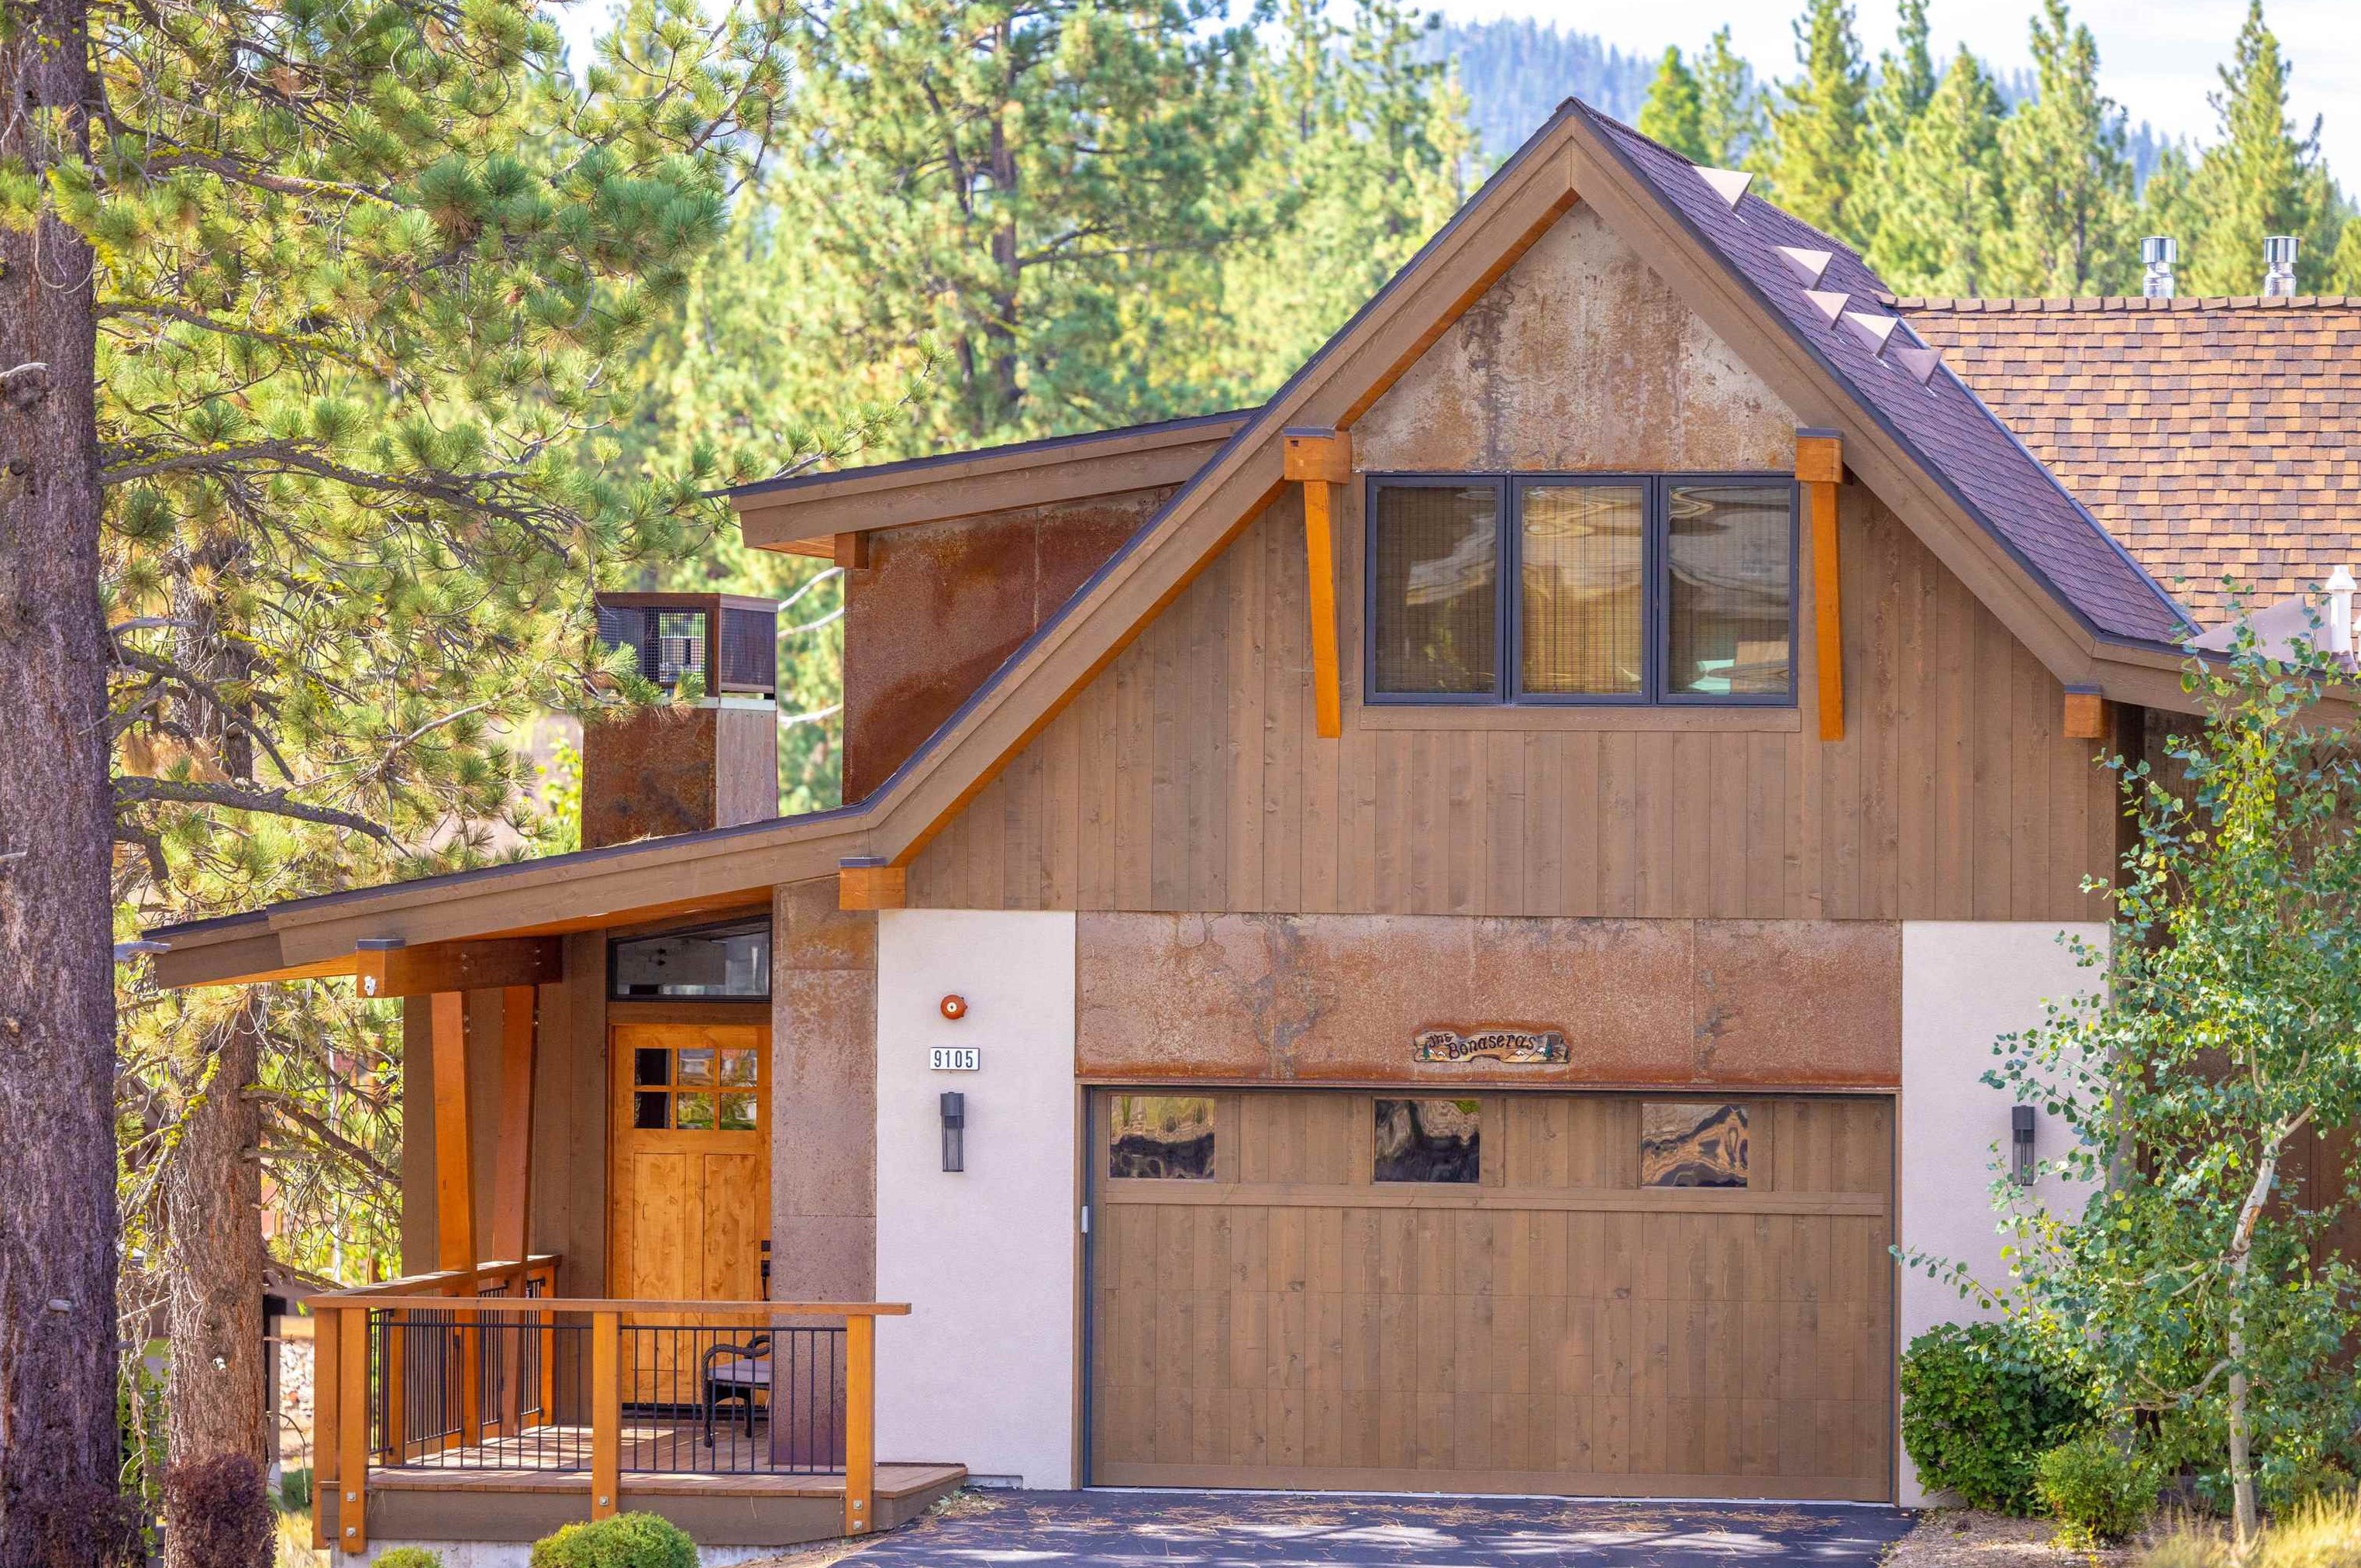 9105 Heartwood Dr, Truckee, CA 96161